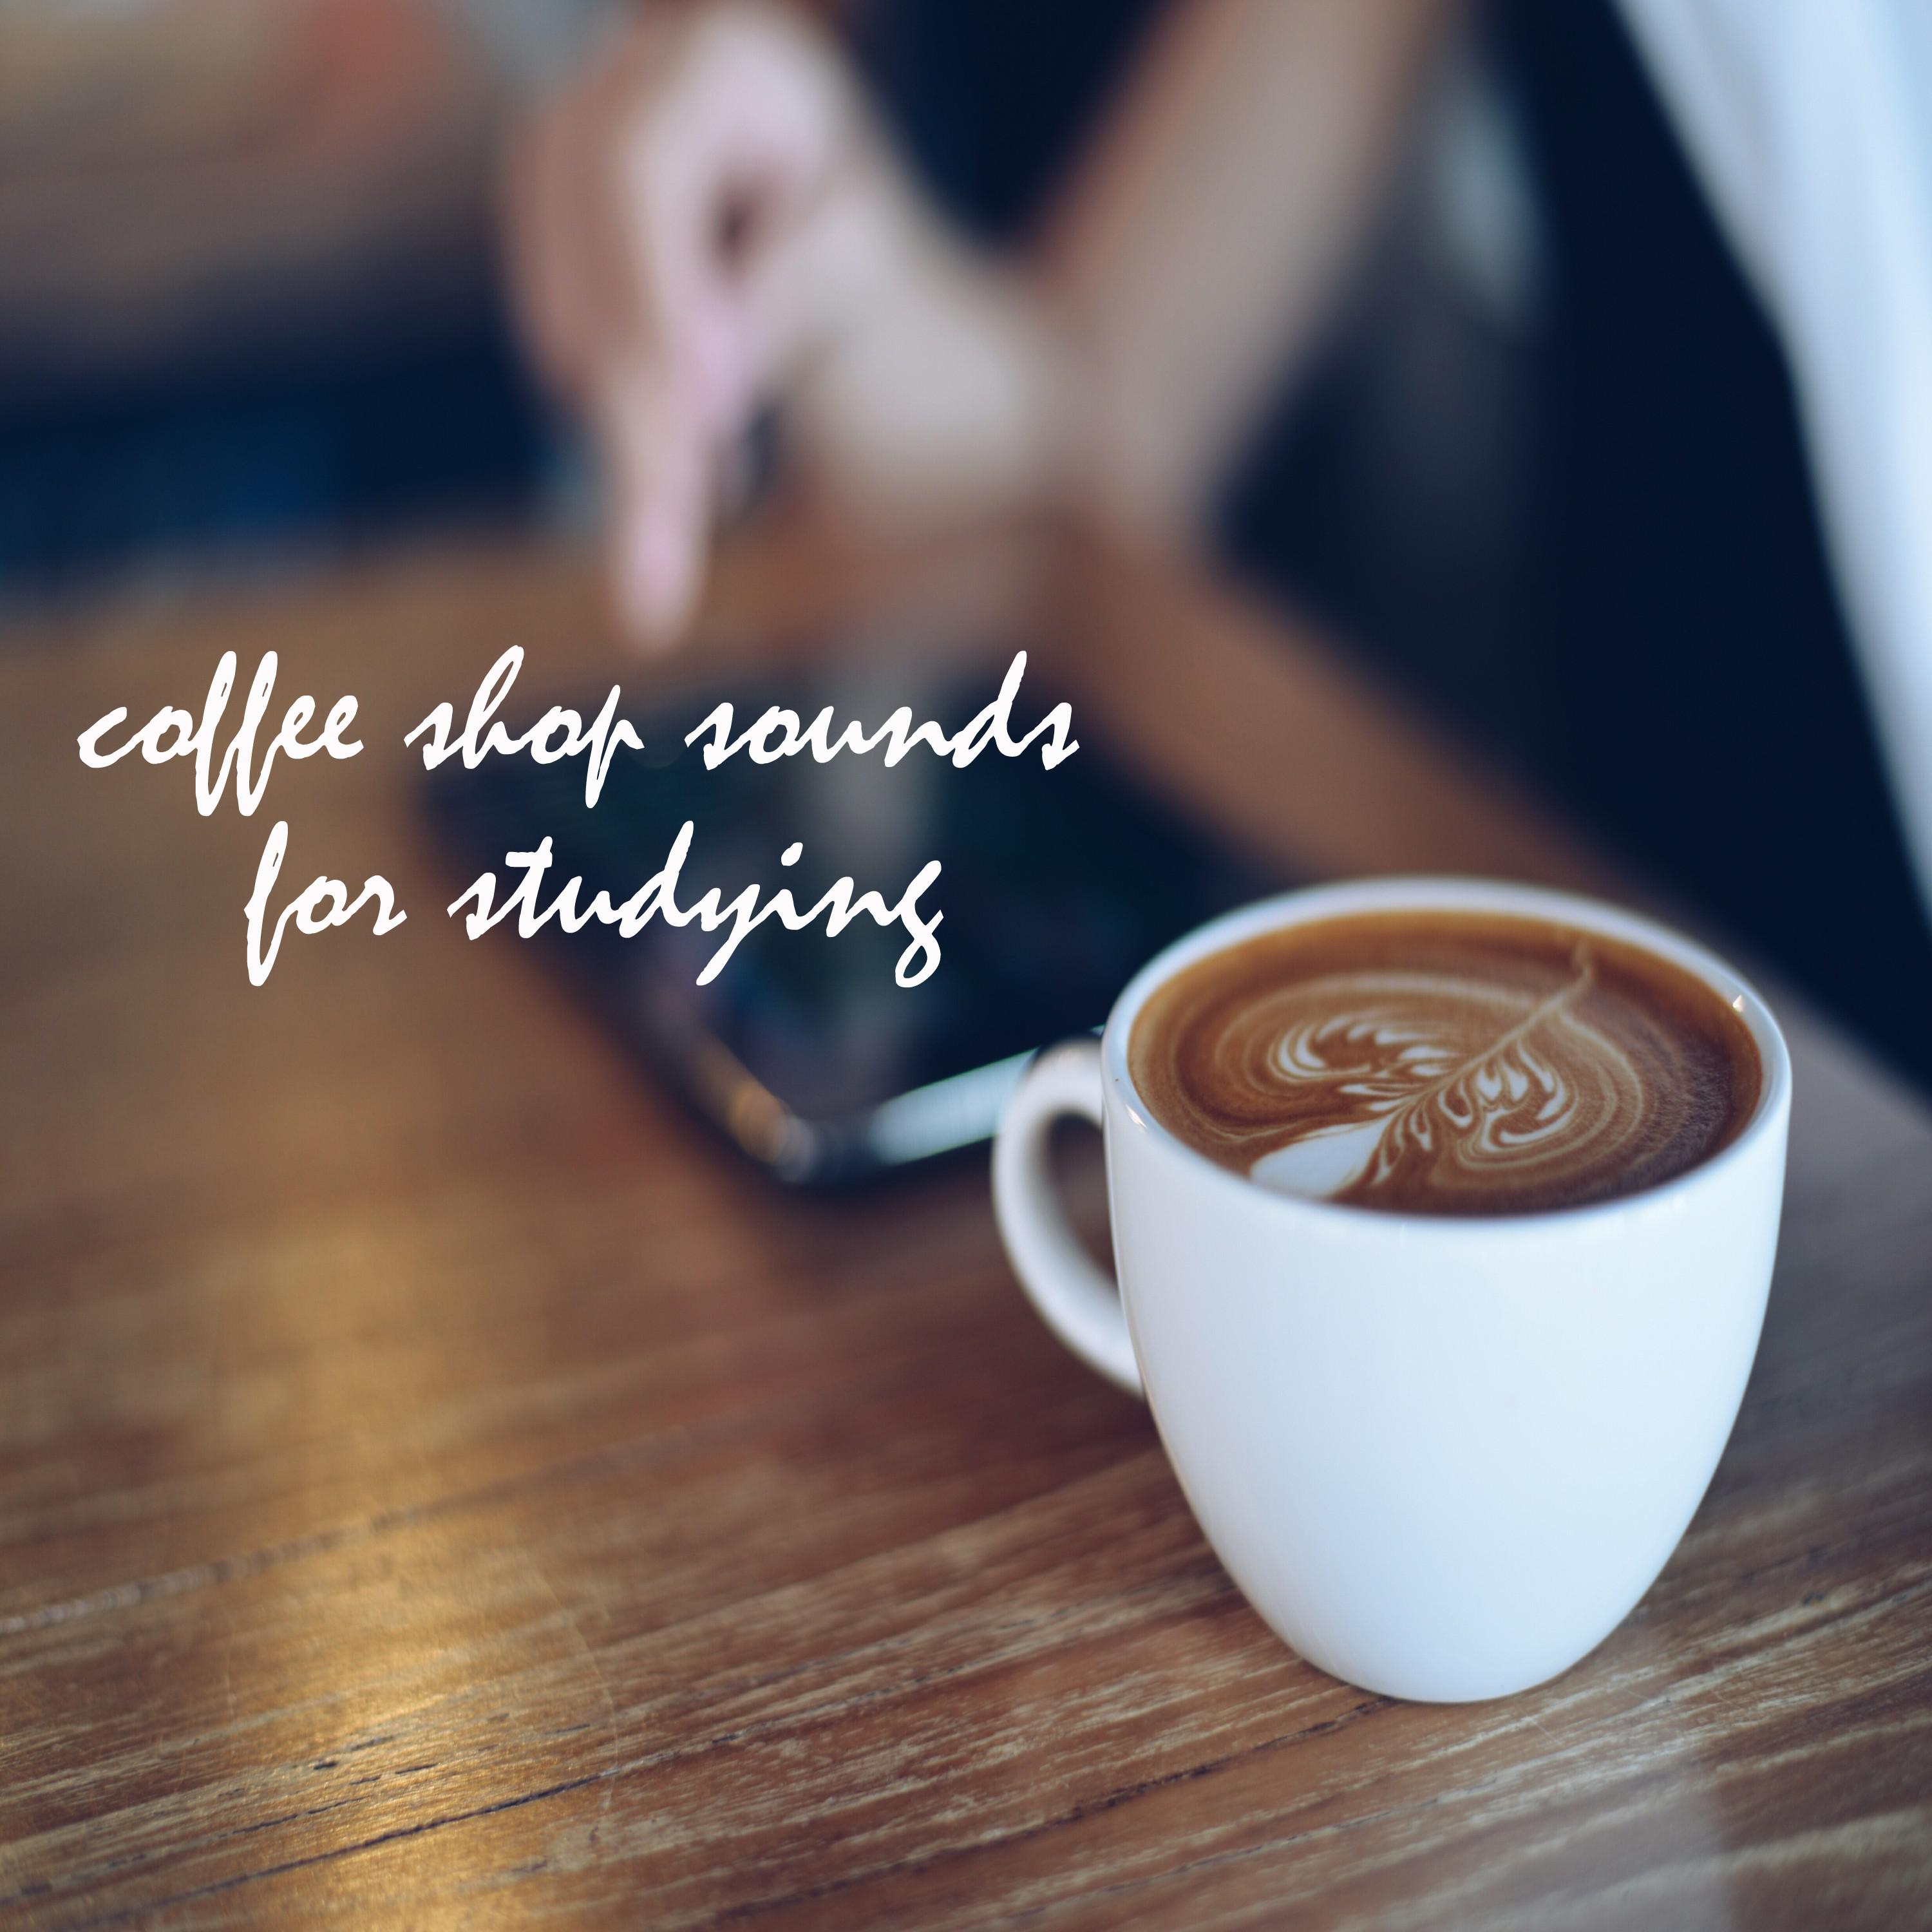 Coffee Shop Sounds for Studying and Working, Pt. 15